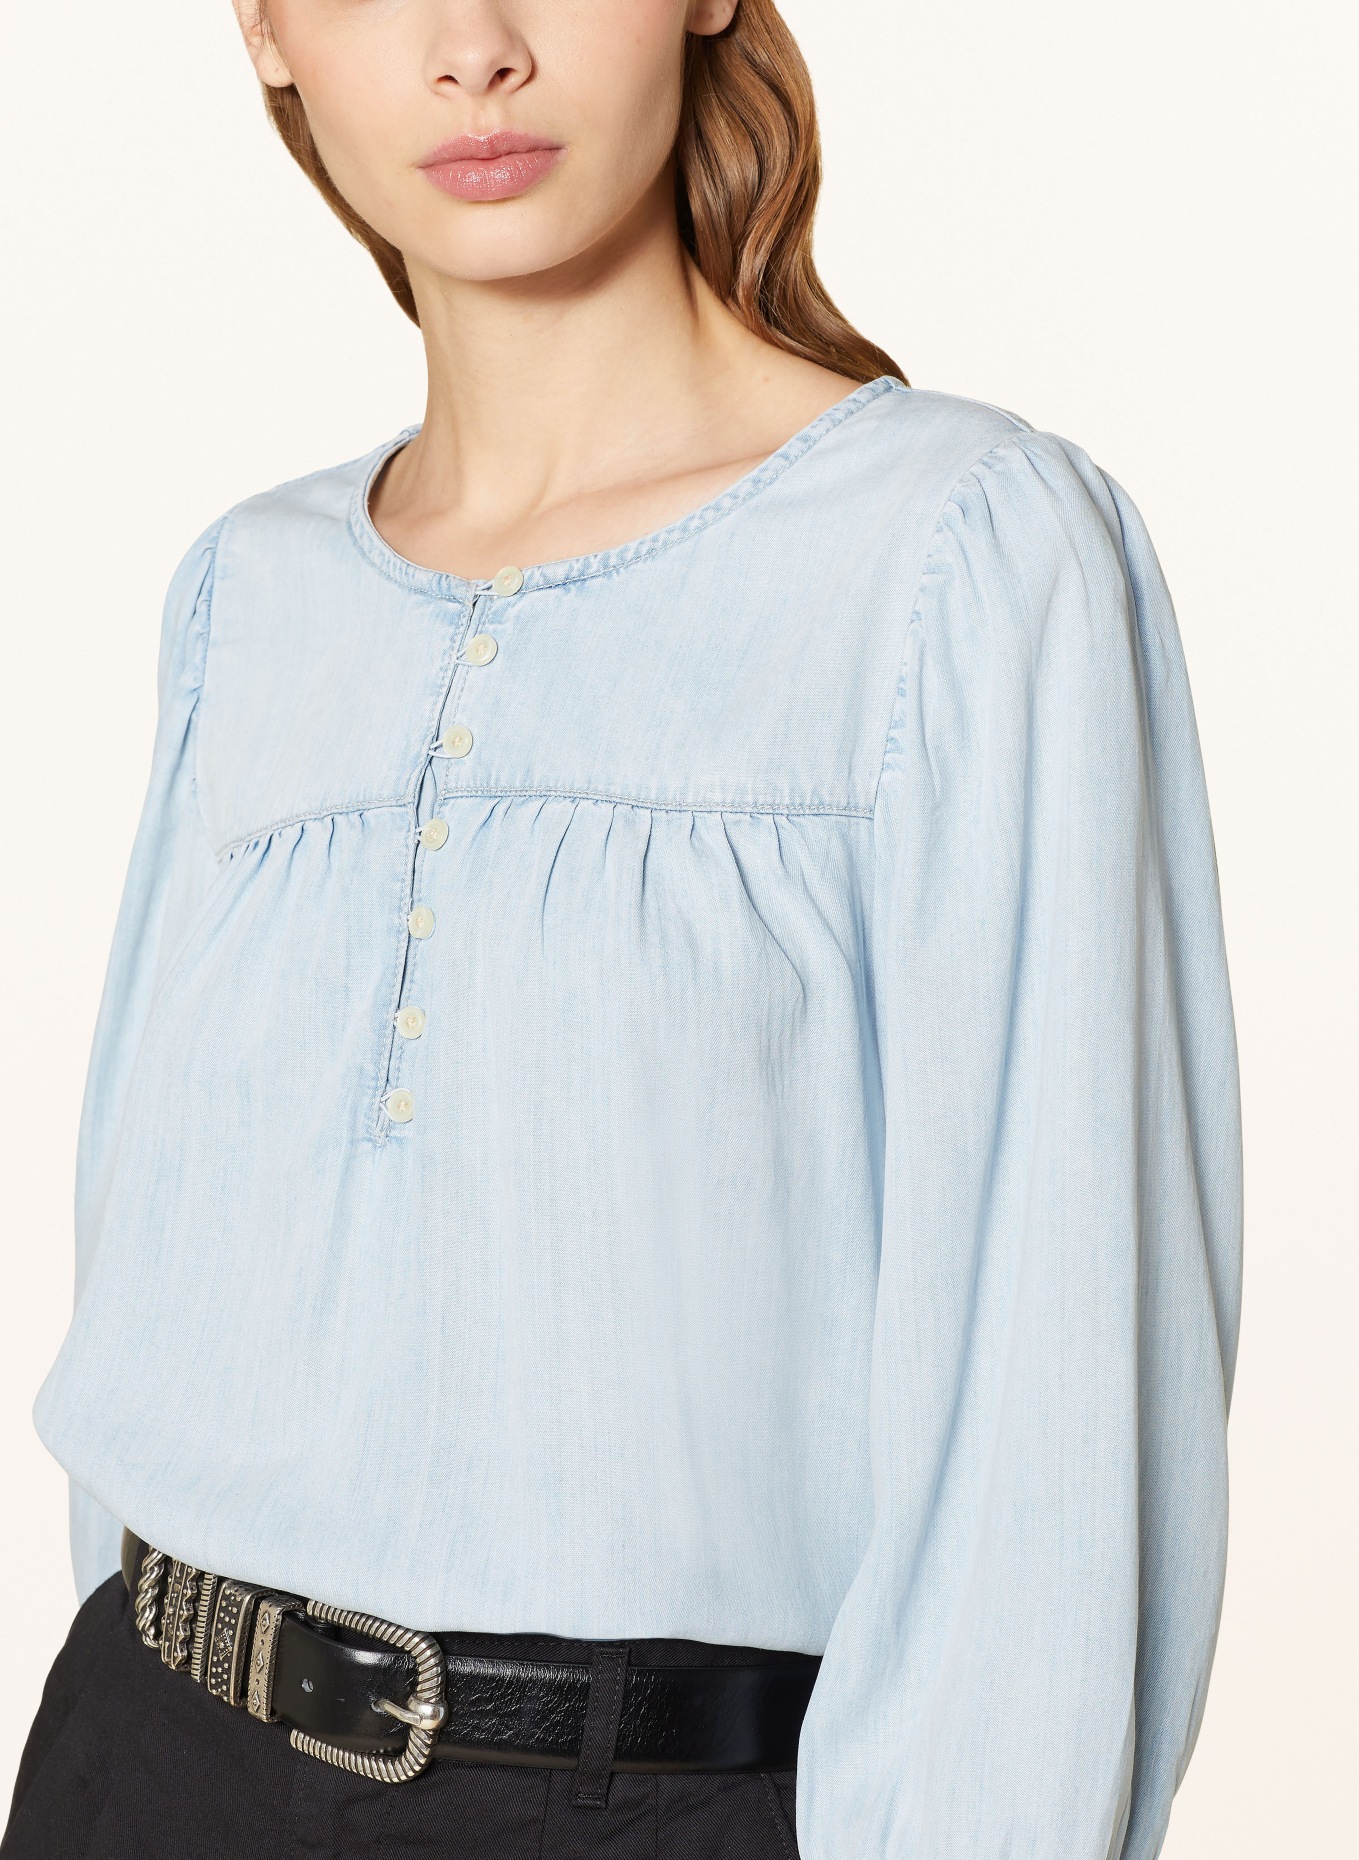 Levi's® Shirt blouse HALSEY in denim look with 3/4 sleeve, Color: LIGHT BLUE (Image 4)